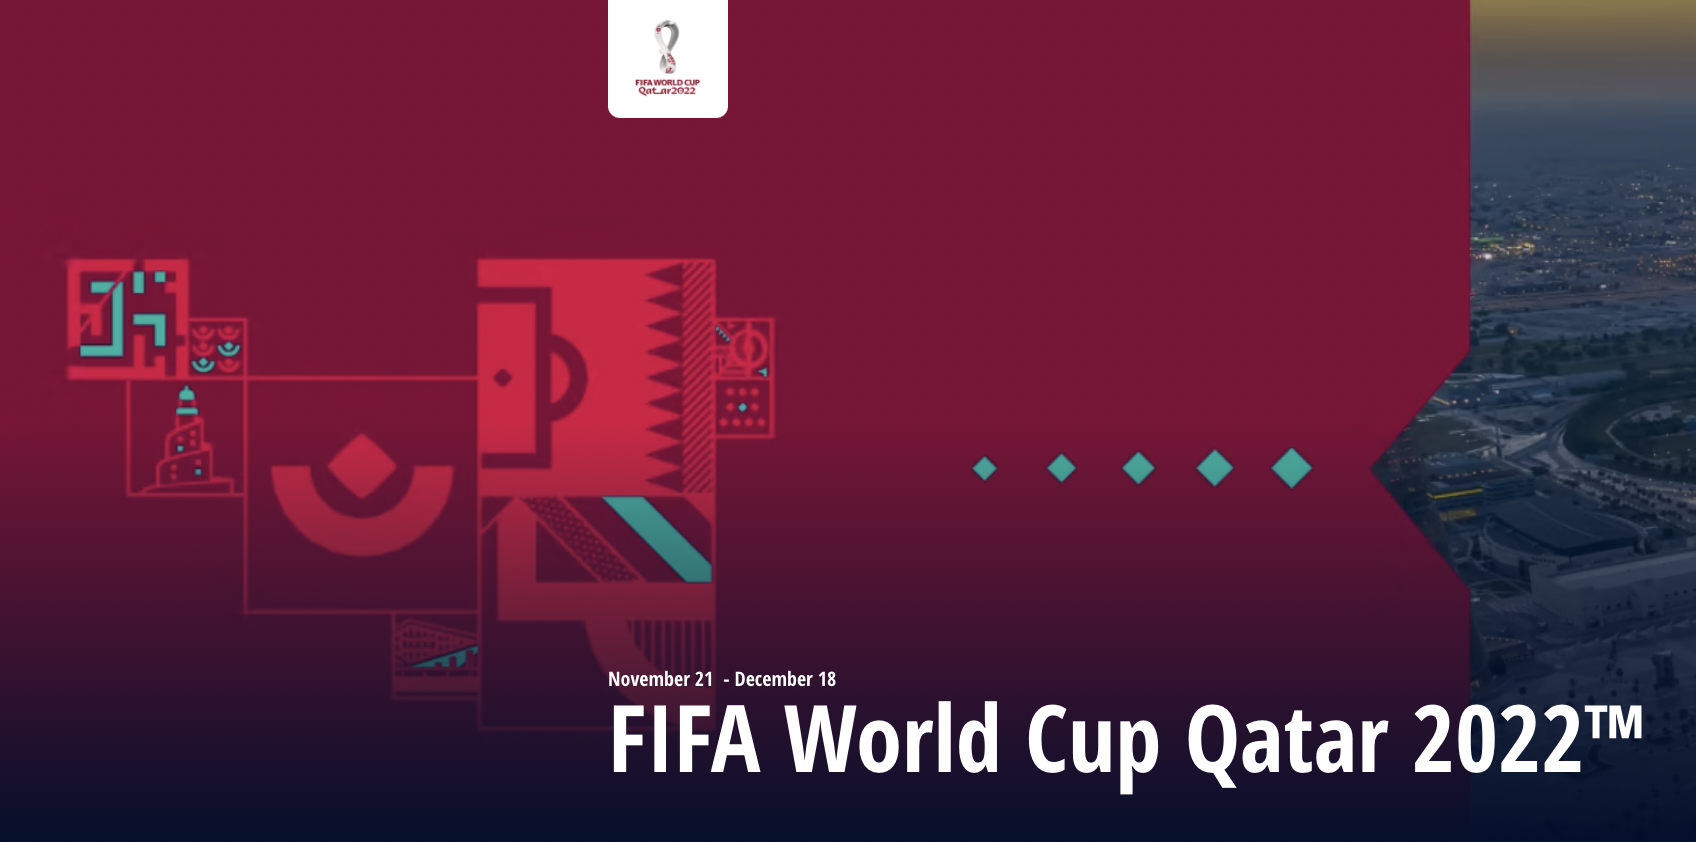 Qatar 2022 World Cup ticket sales open with final priced at $1,617 for Cat1 